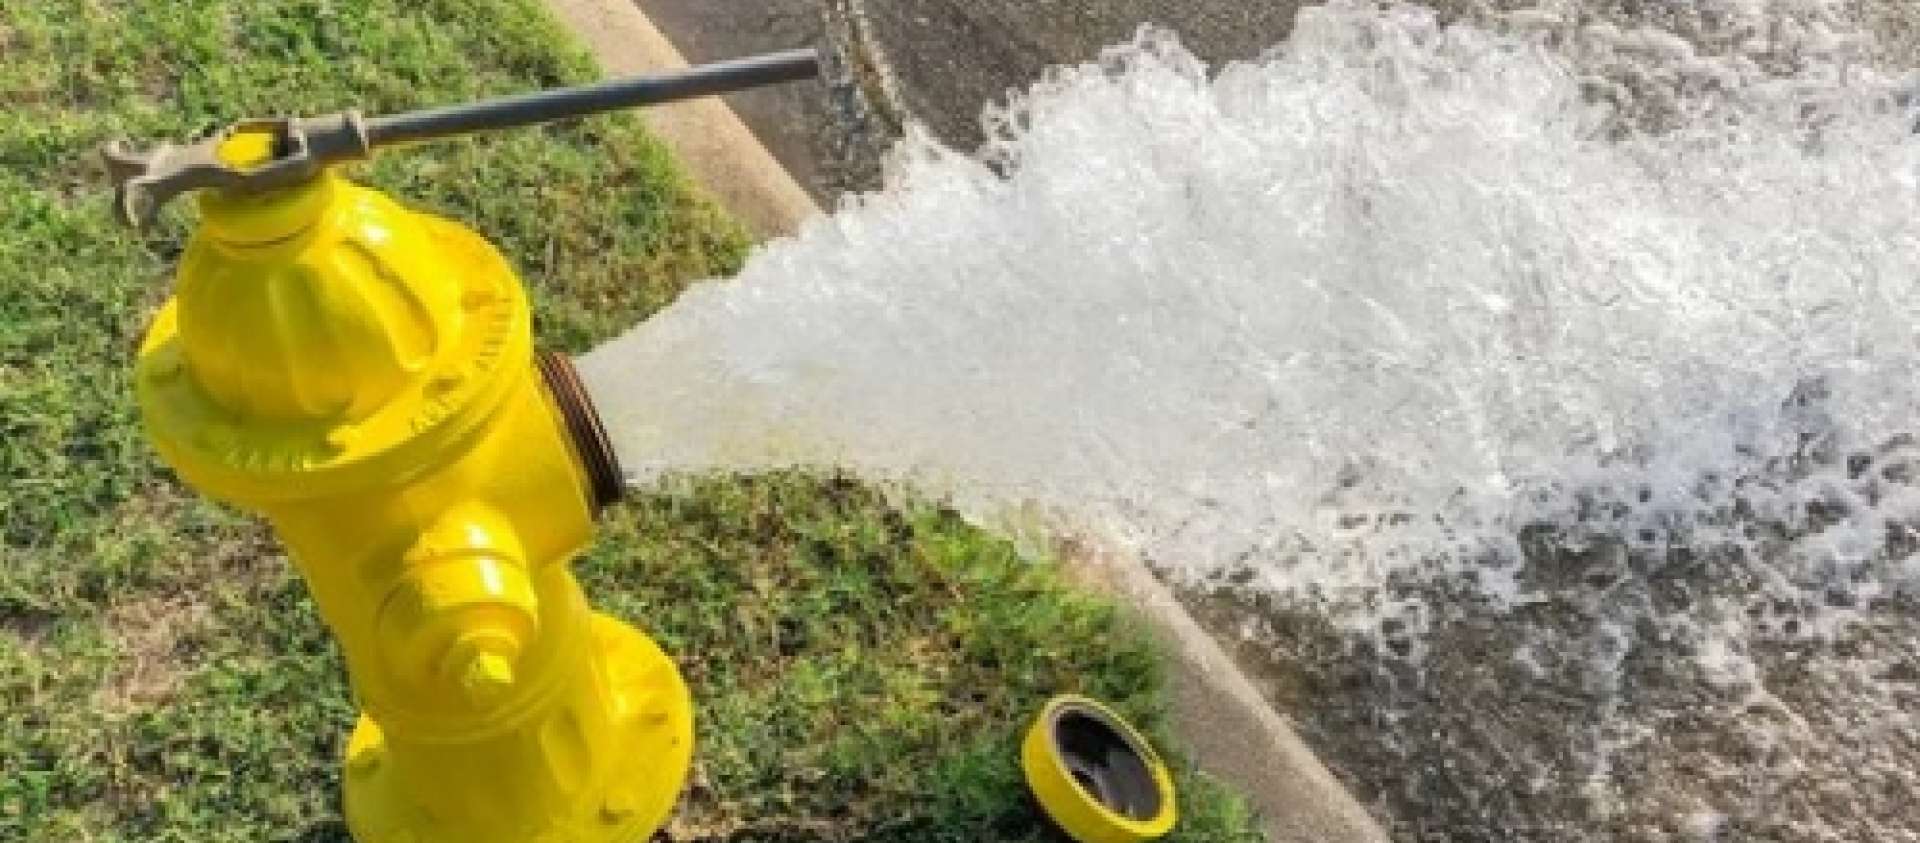 a fire hydrant flushing water